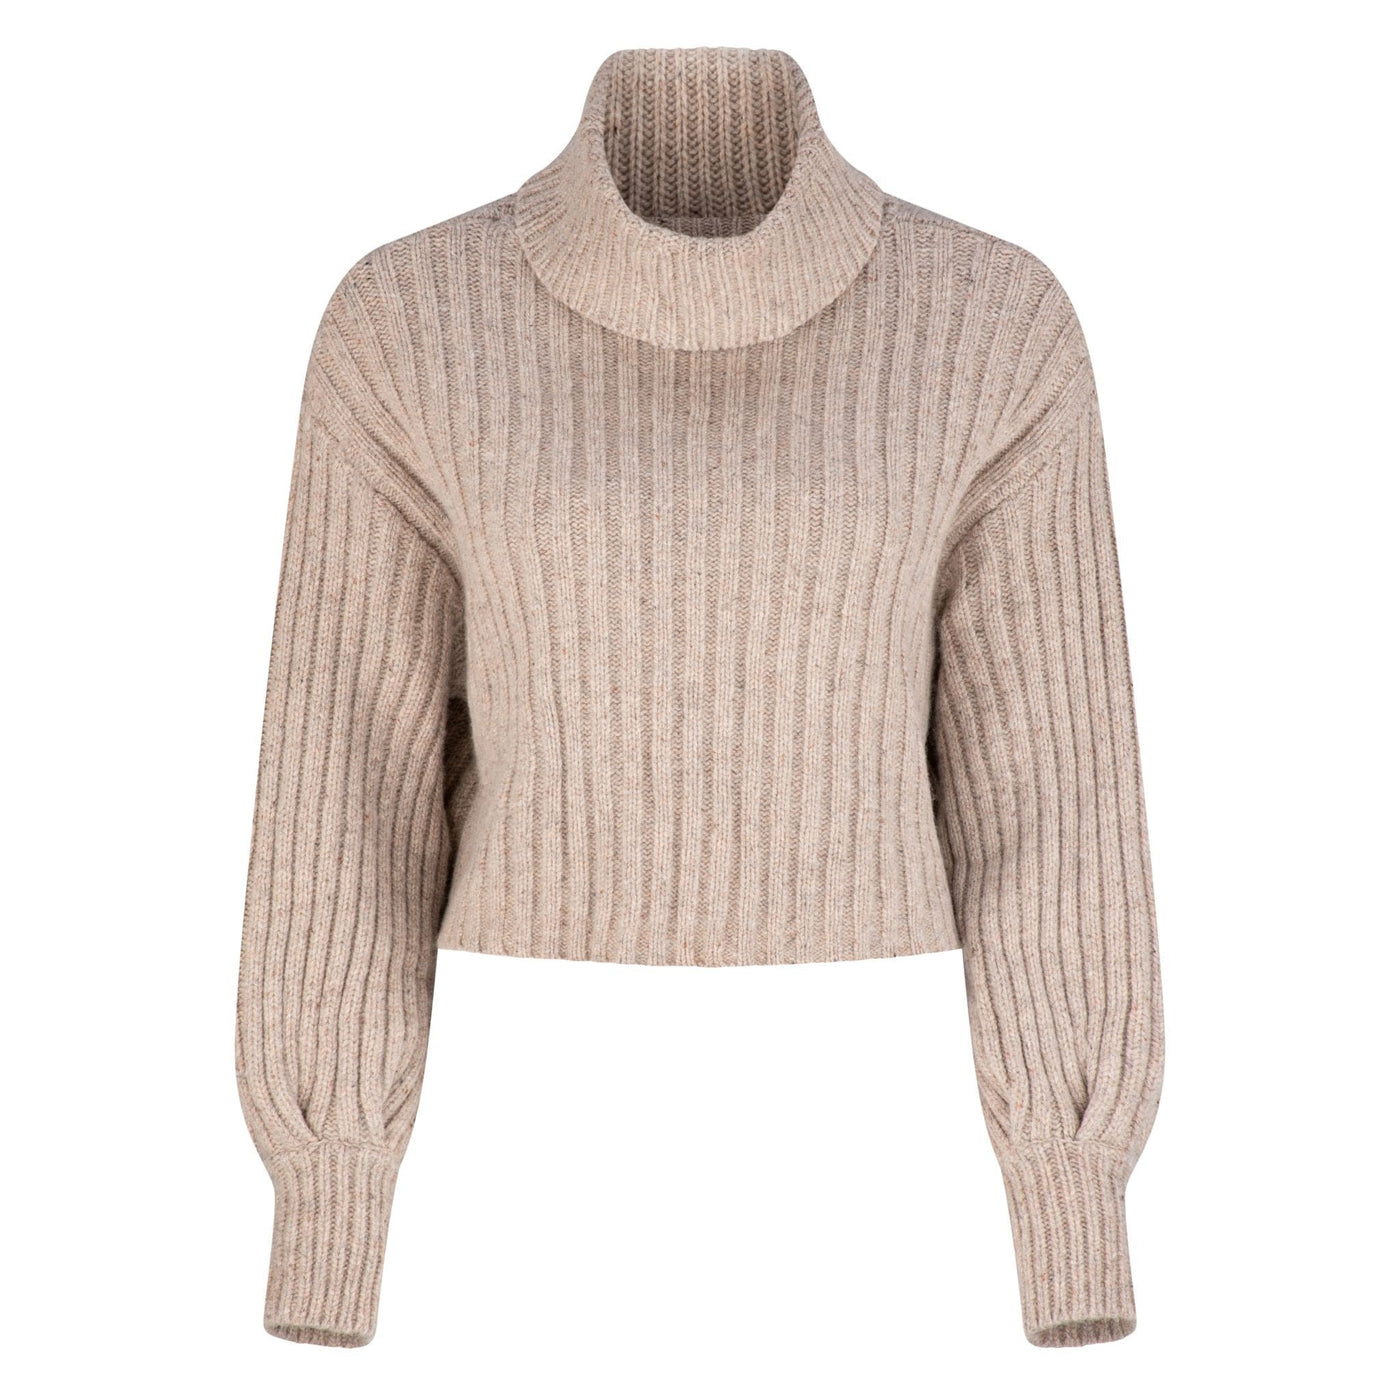 LILLY PILLY Collection 100% Extra-fine Merino wool knitted pull over top in Oatmeal Speckle. 3D model showing front view of knitwear.